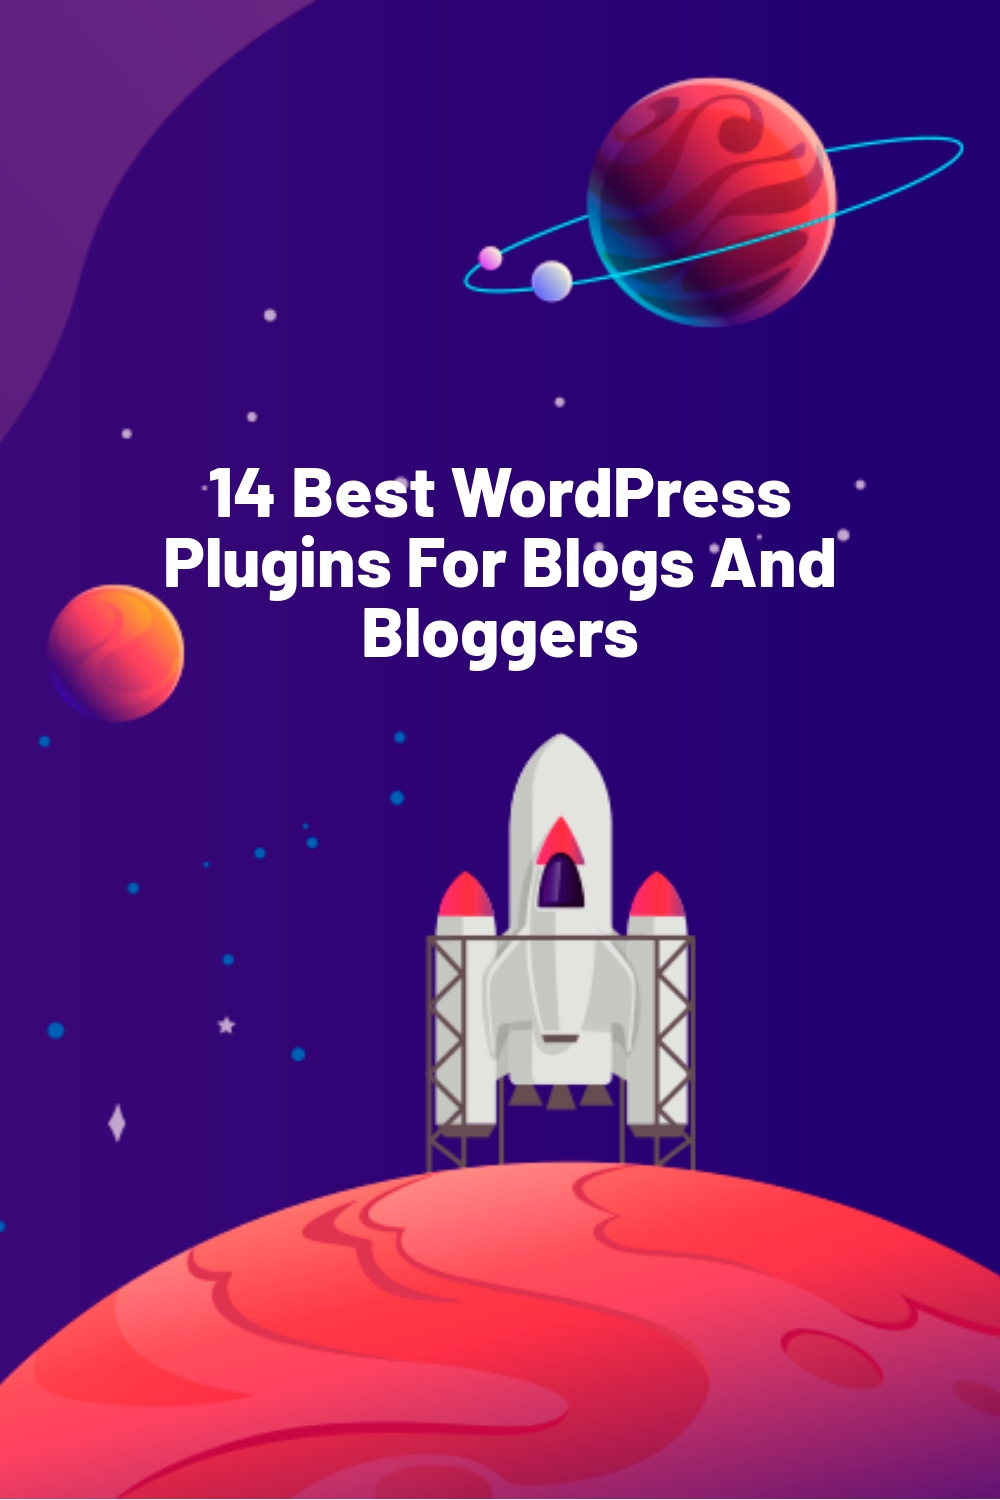 14 Best WordPress Plugins For Blogs And Bloggers